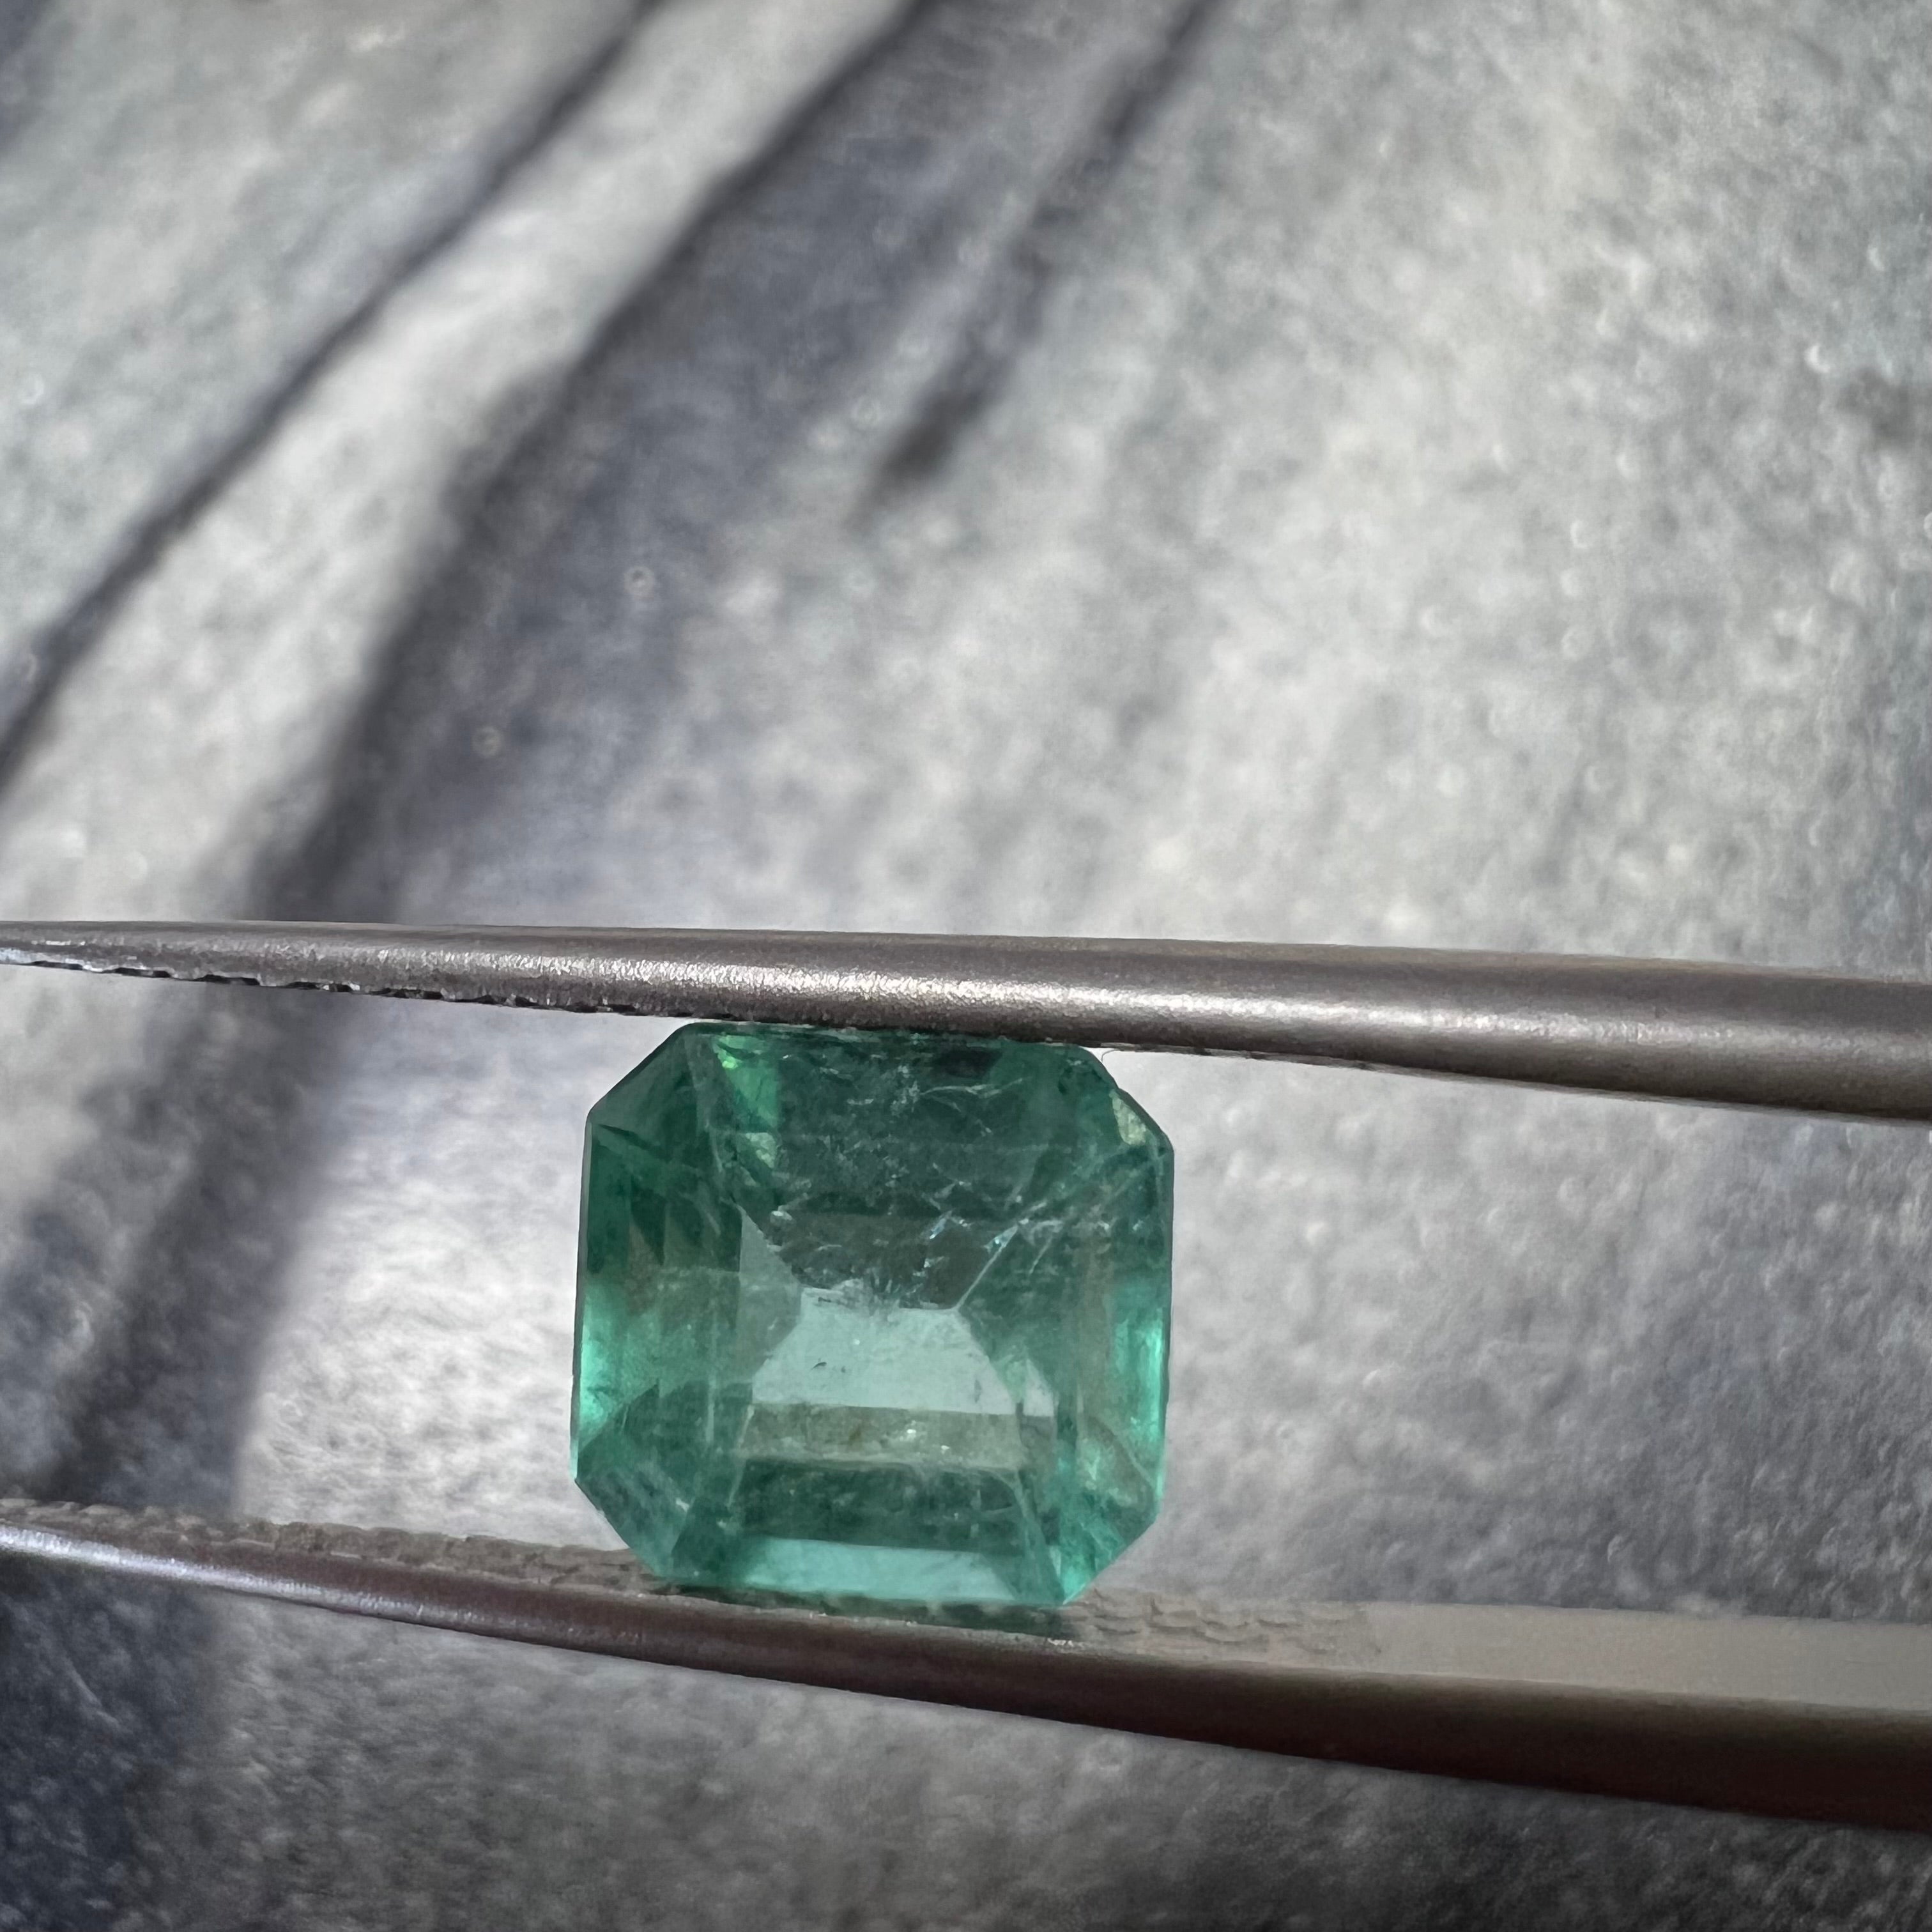 3.93CTW Pair of Natural Colombian Emerald Loose Ascher Cut